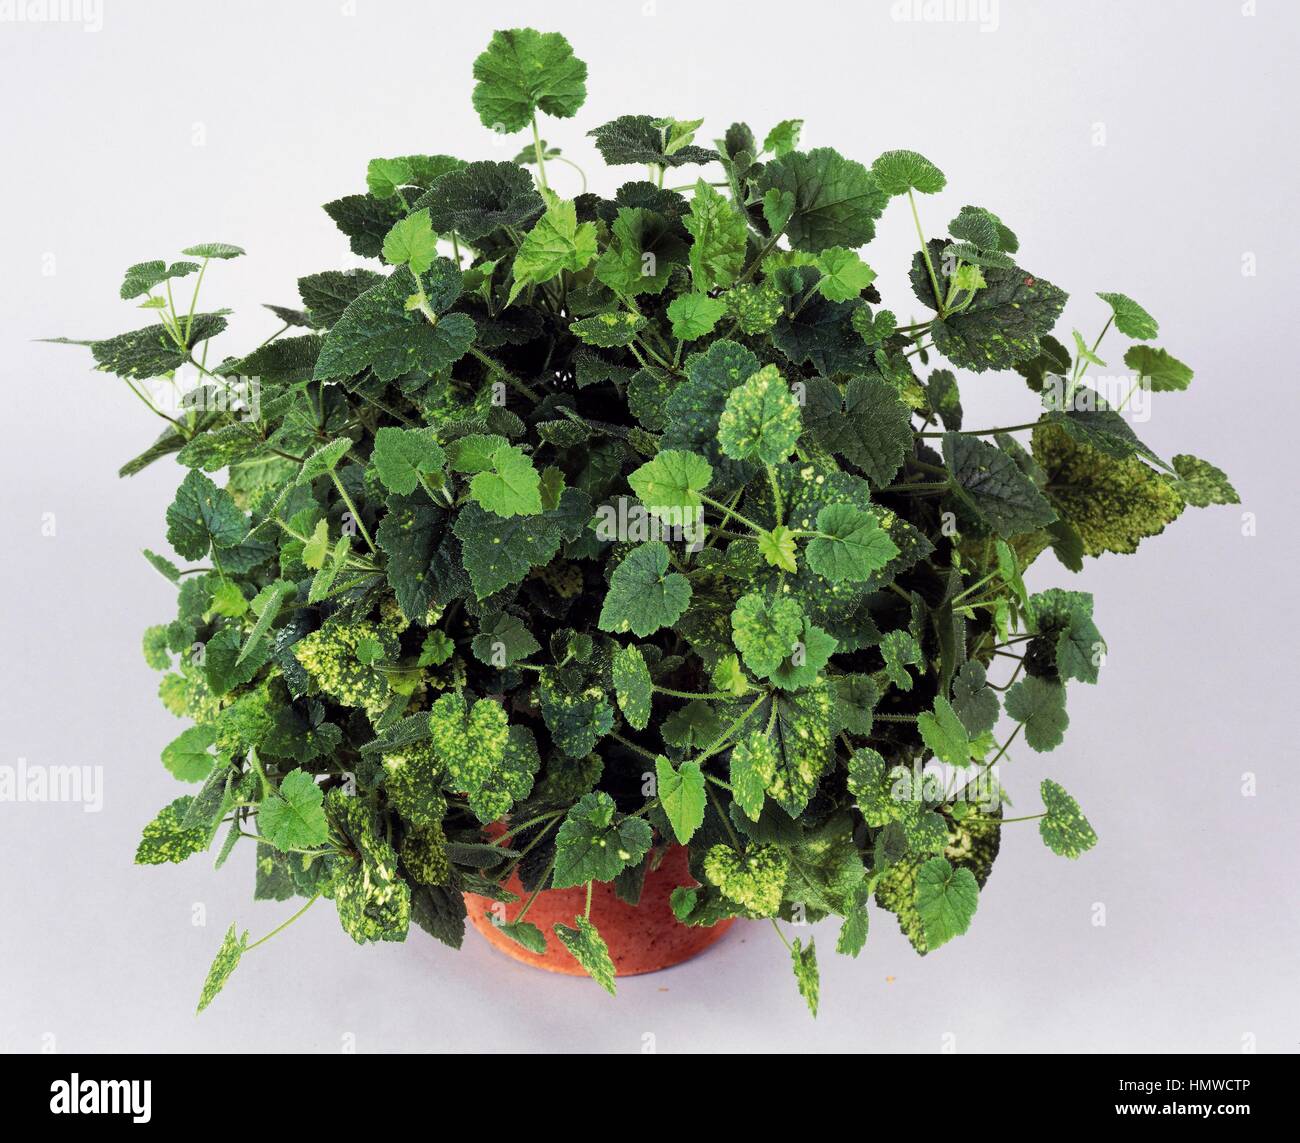 Piggyback plant, Youth on age or Thousand mothers (Tolmiea menziesii), Saxifragaceae. Stock Photo